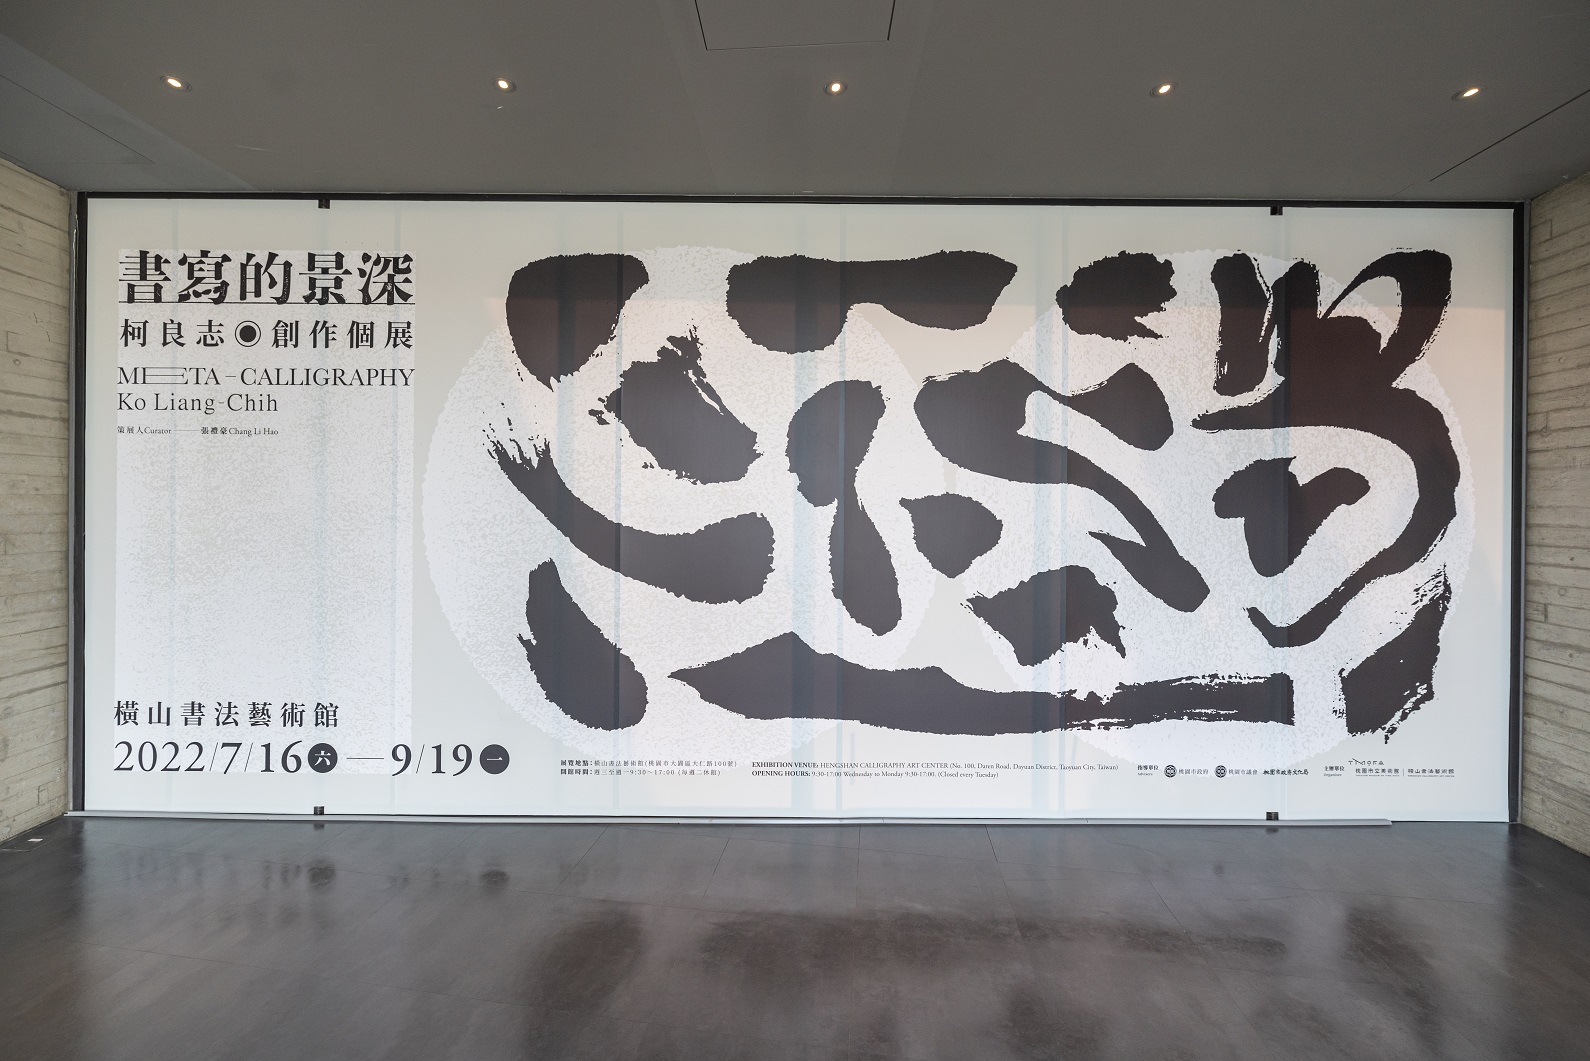 Invitation Exhibition of the Champion of the 2021 Hengshan Award_Meta Calligraphy: Ko Liang-chih